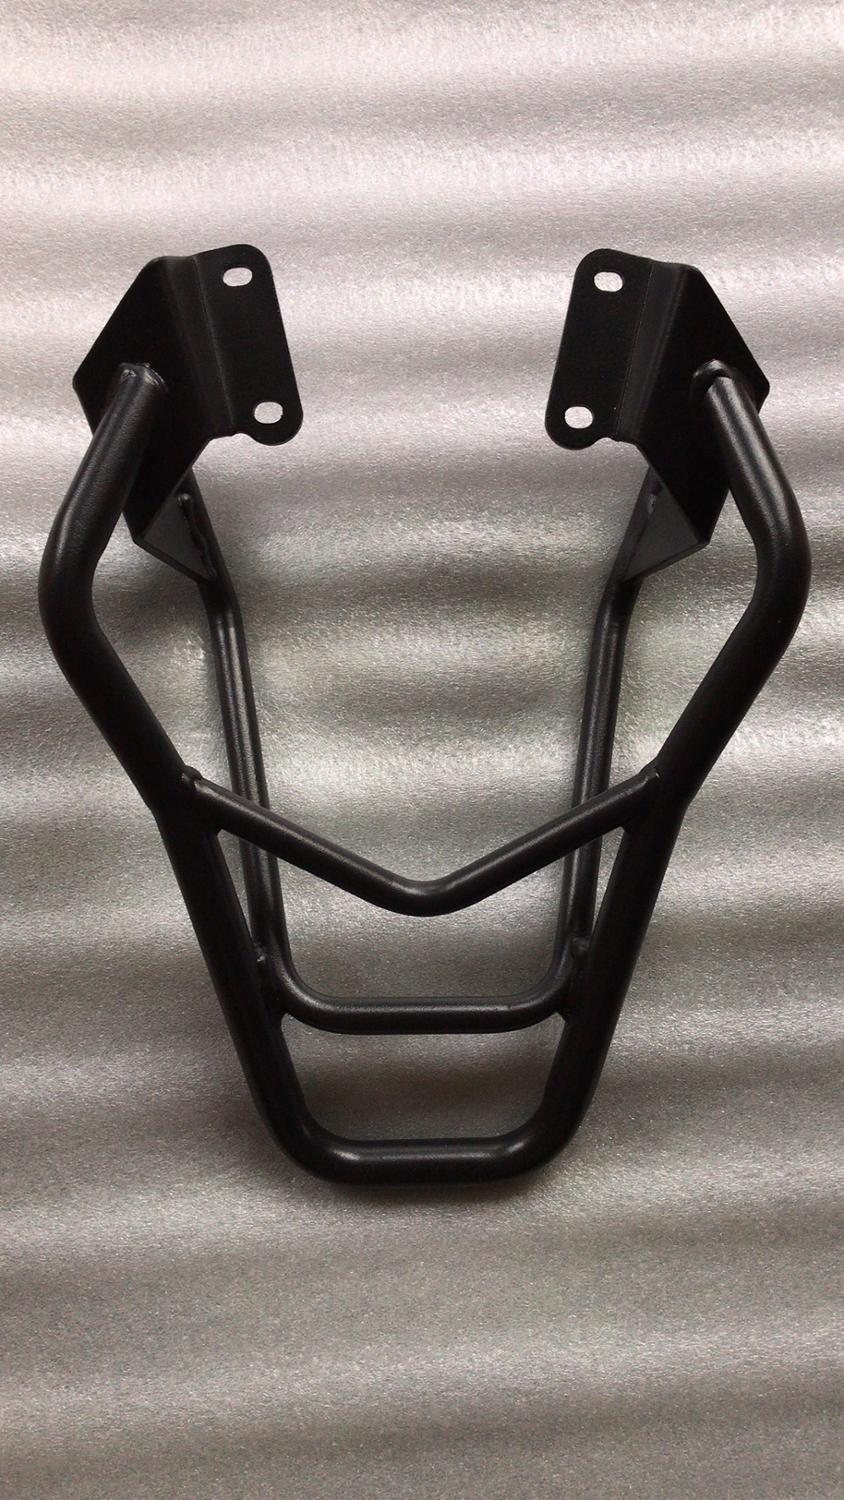 Rear Carrier Luggage Rack For HONDA CB500X 18 19/ CBR500R CB500F Motorcycle Accessories CB 500X 500F